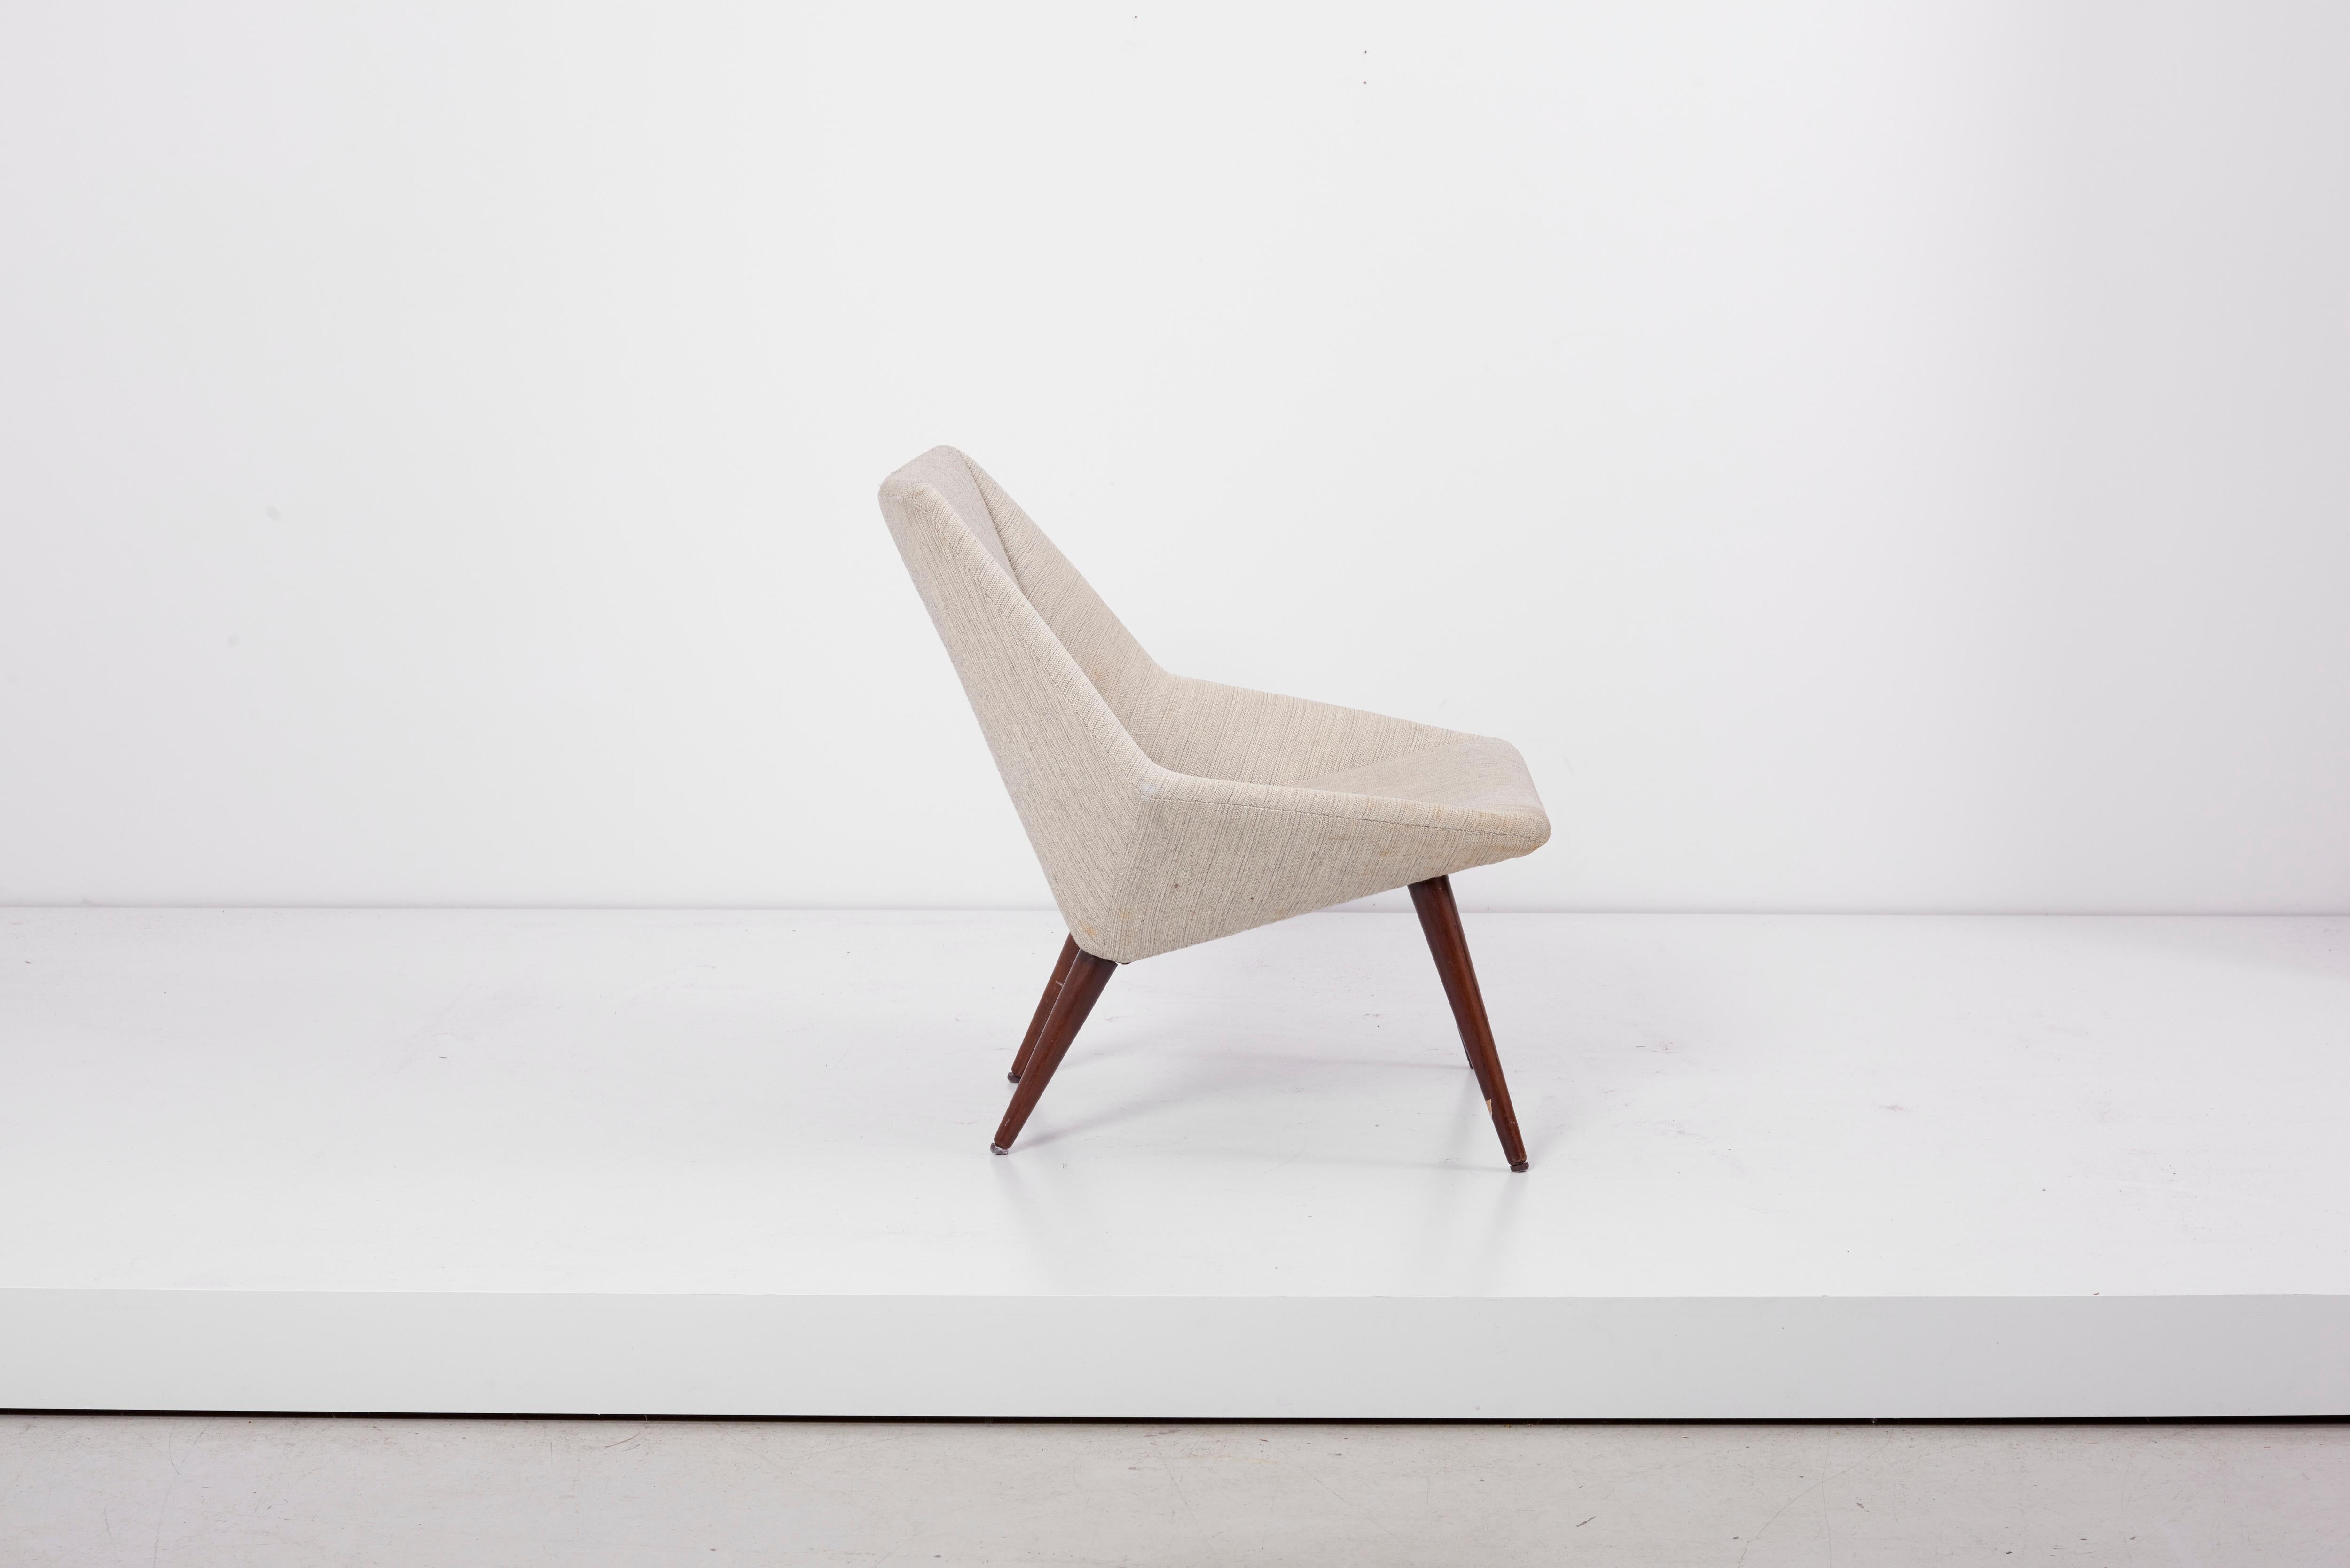 Jewel-cut lounge chair, model 93 with low back, designed 1950s by Nanna Ditzel and produced by Søren Willadsen in Denmark. Wooden base with upholstery. Marked with dealer label by Illum Bolighus København.